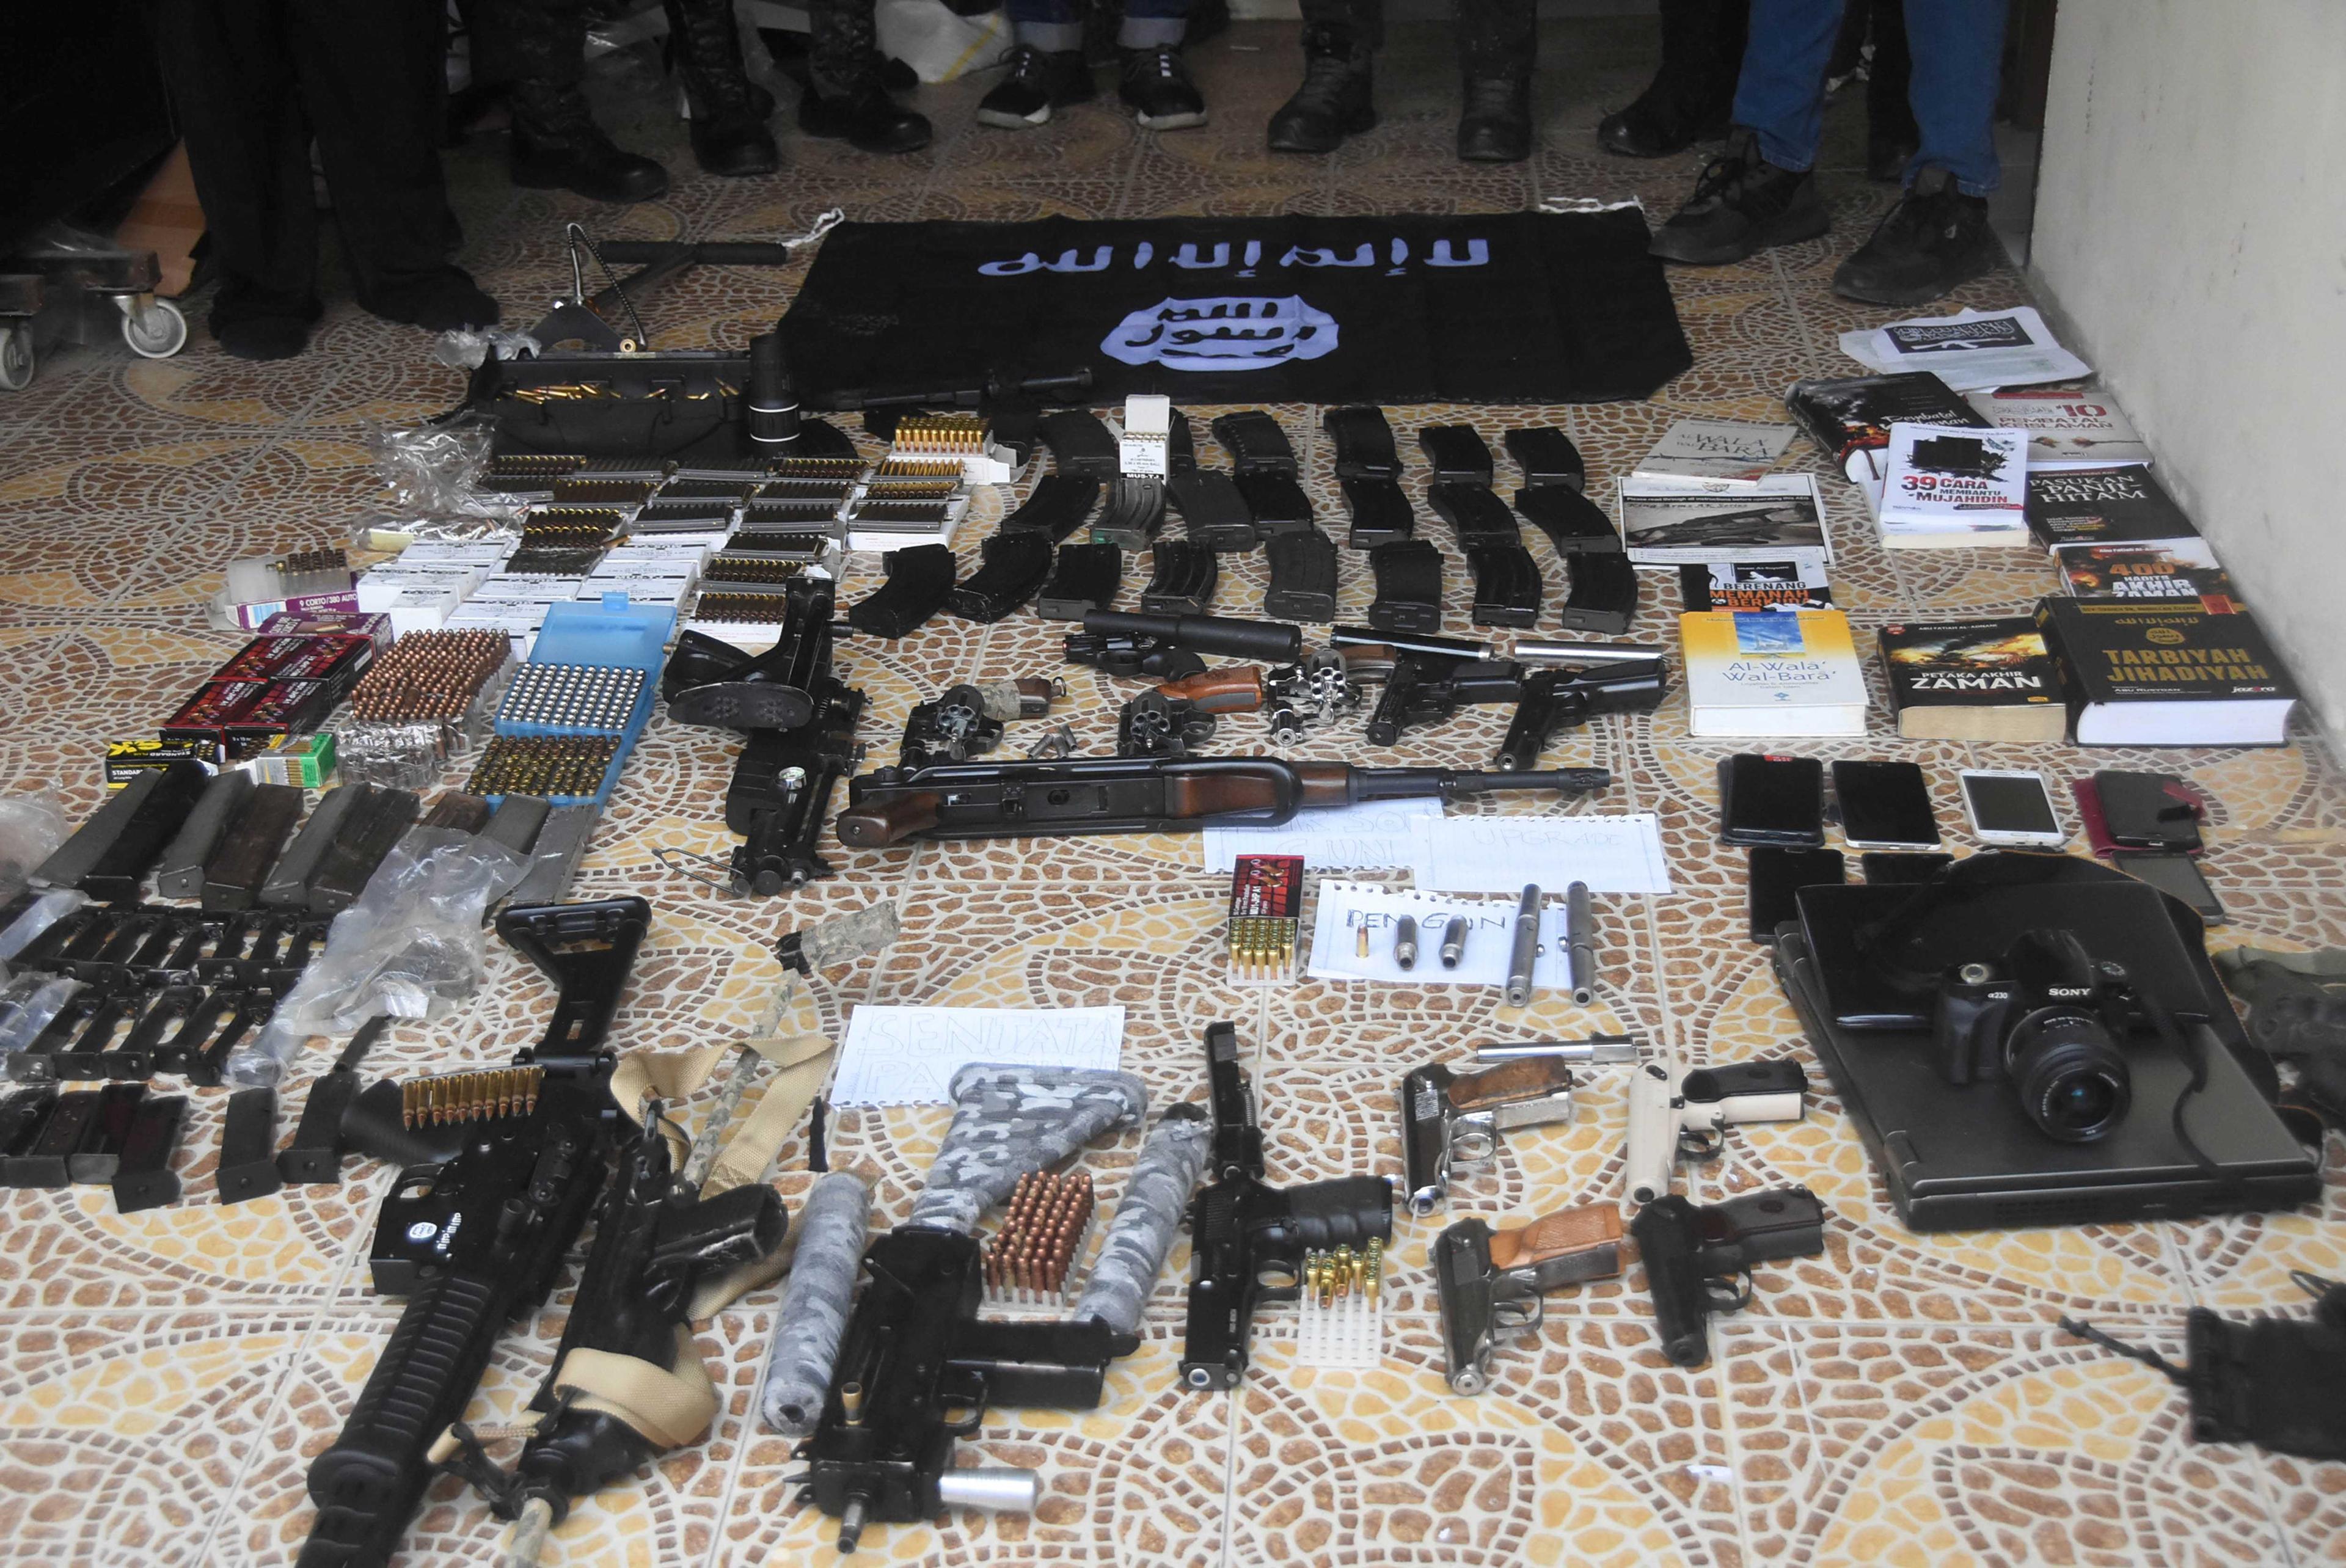 Firearms and items seized by Indonesian anti-terror squad (Densus 88), are shown after a man was arrested, allegedly as an Islamic State of Iraq and Syria (Isis) sympathiser, in Bekasi, West Java province, Indonesia Aug 14. Photo: Reuters